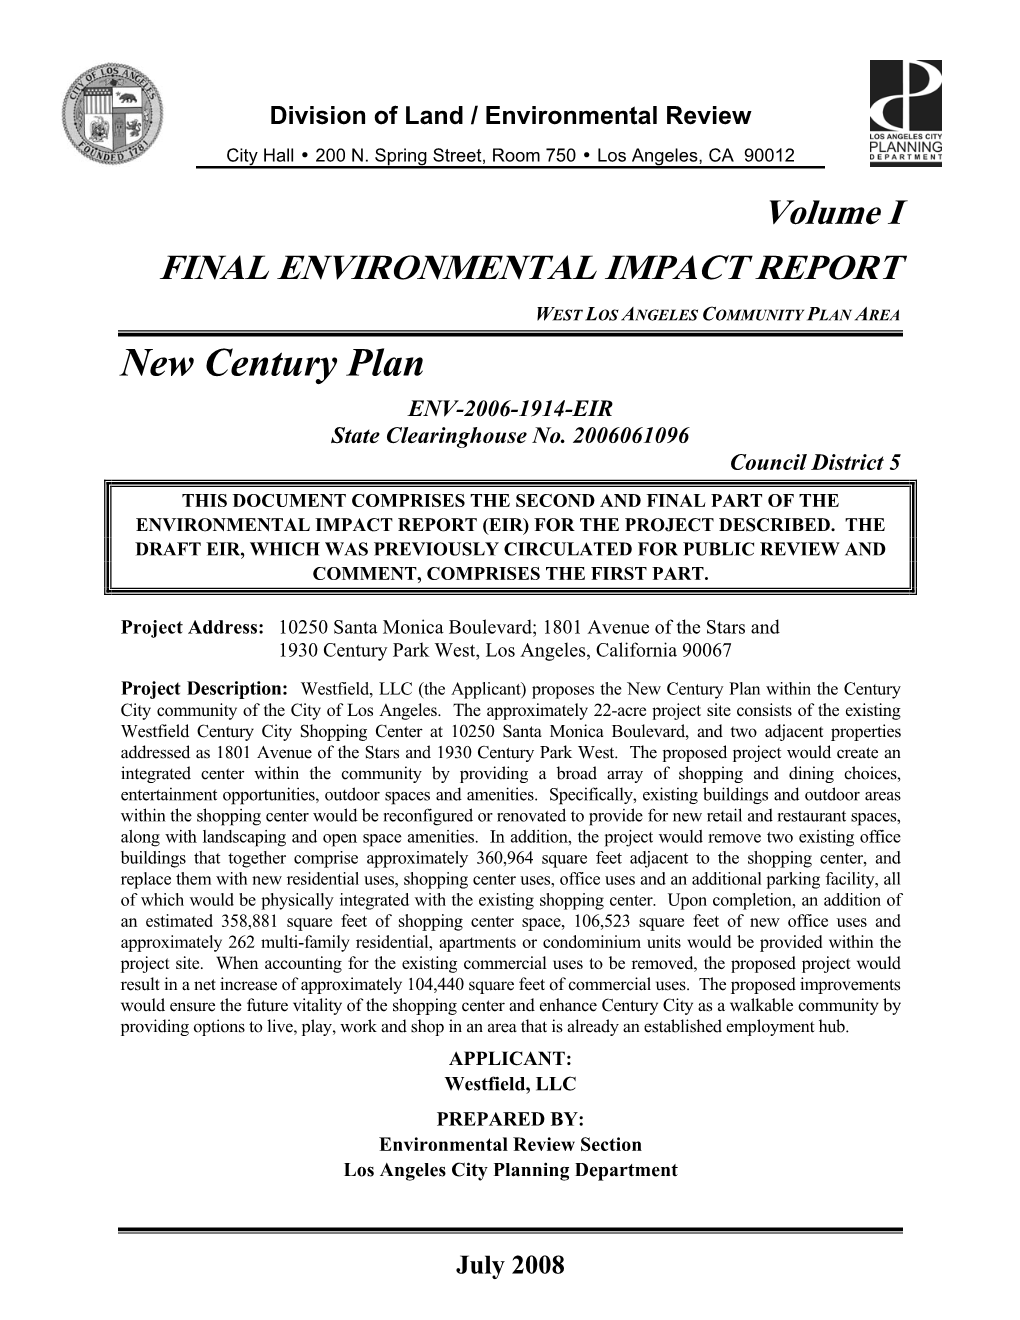 New Century Plan ENV-2006-1914-EIR State Clearinghouse No